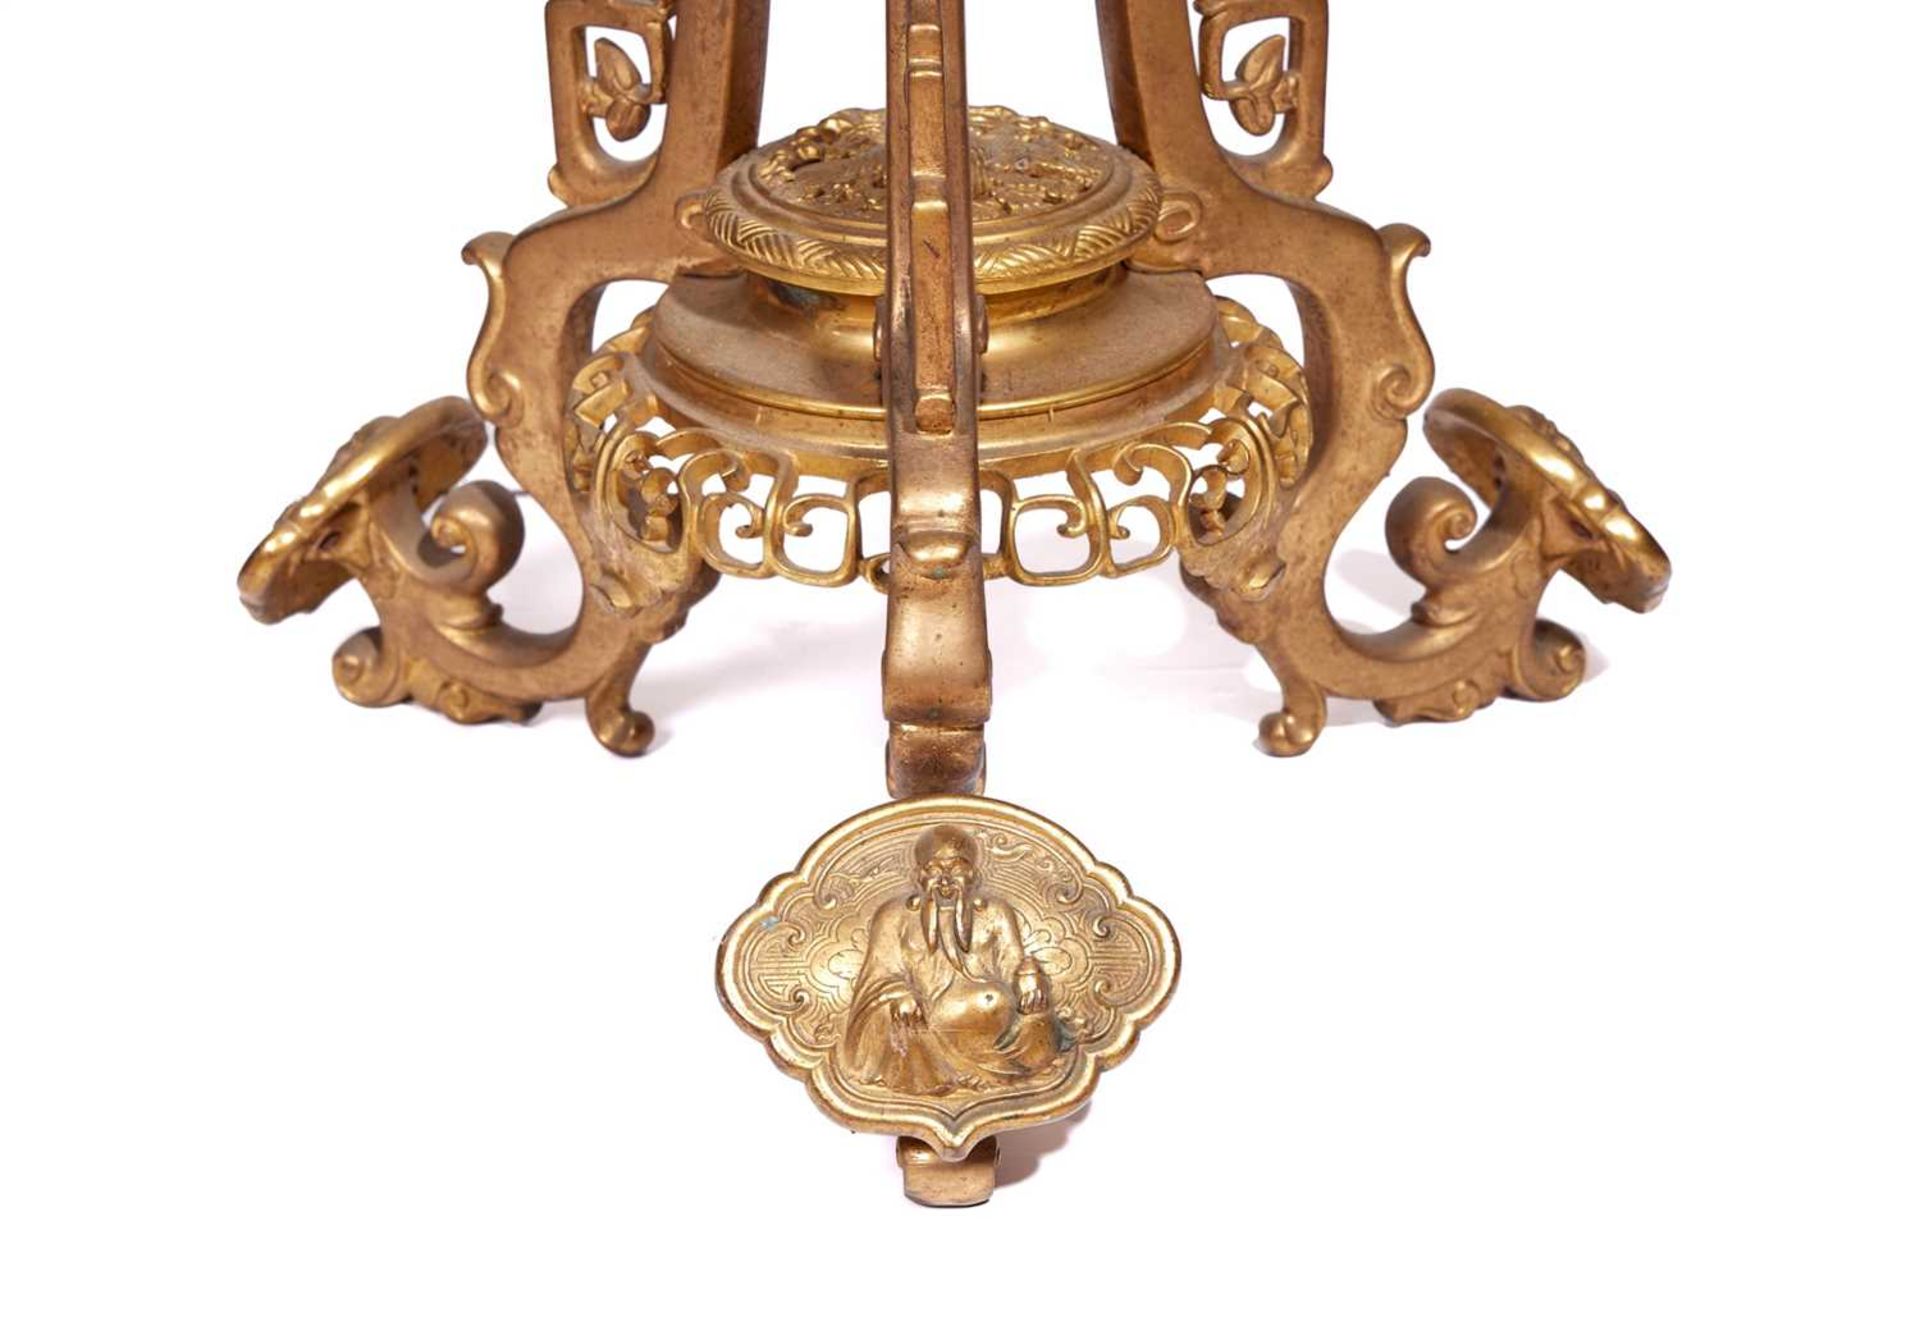 ATTRIBUTED TO EDOUARD LIEVRE: A FINE 19TH CENTURY GILT BRONZE FLOOR STANDING LAMP - Image 2 of 5